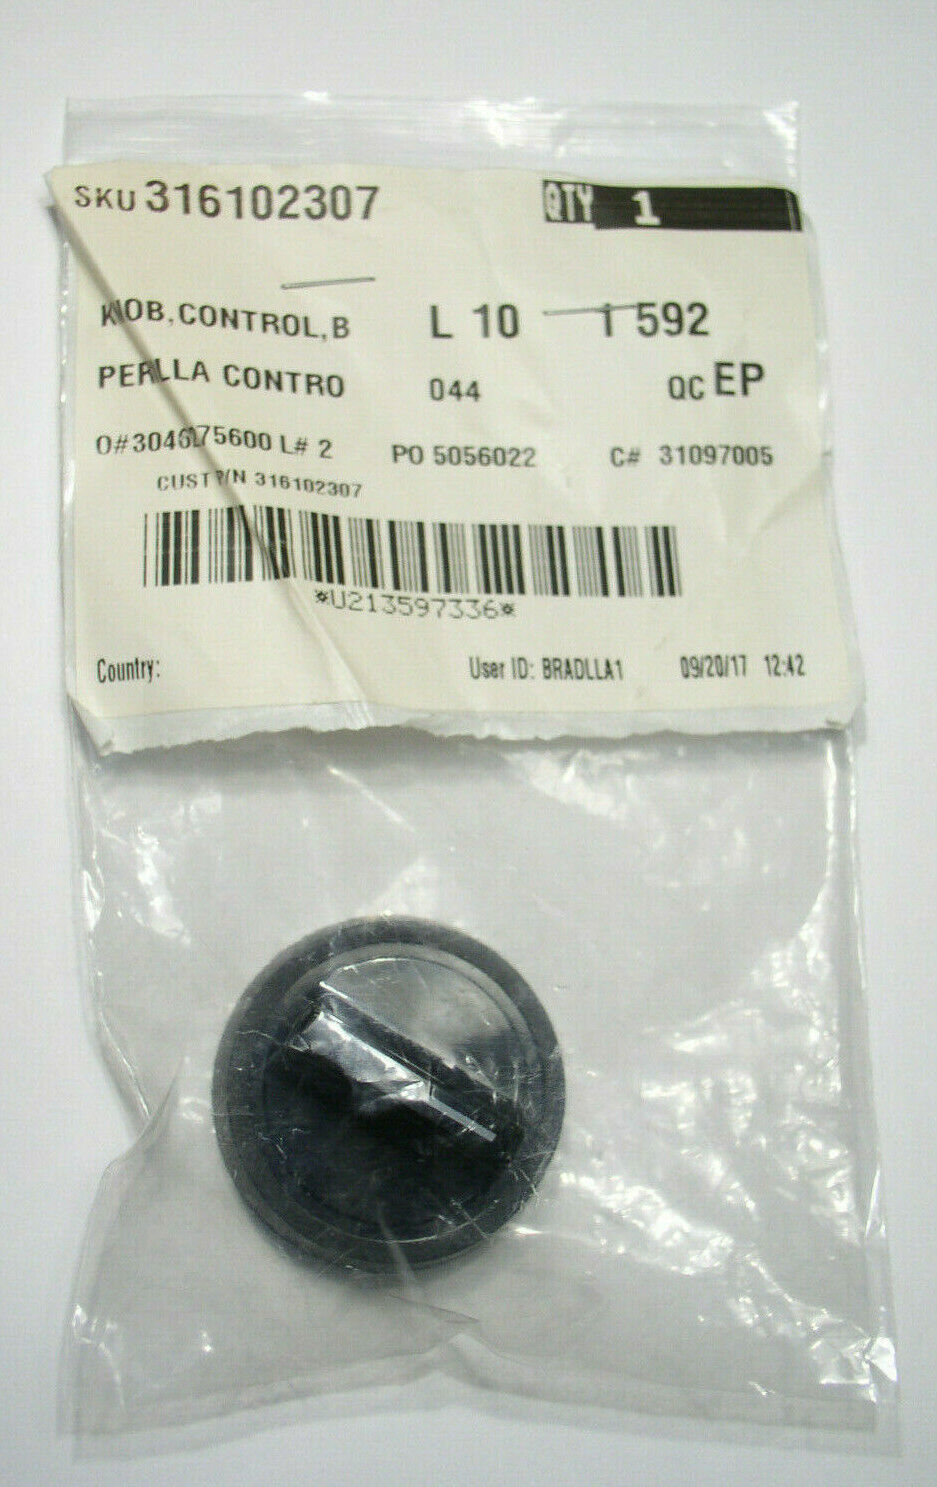 NEW IN PACKAGE free shipping FRIGIDAIRE KENMORE KNOB 316102307 ETC. 2021new shipping free shipping CONTROL